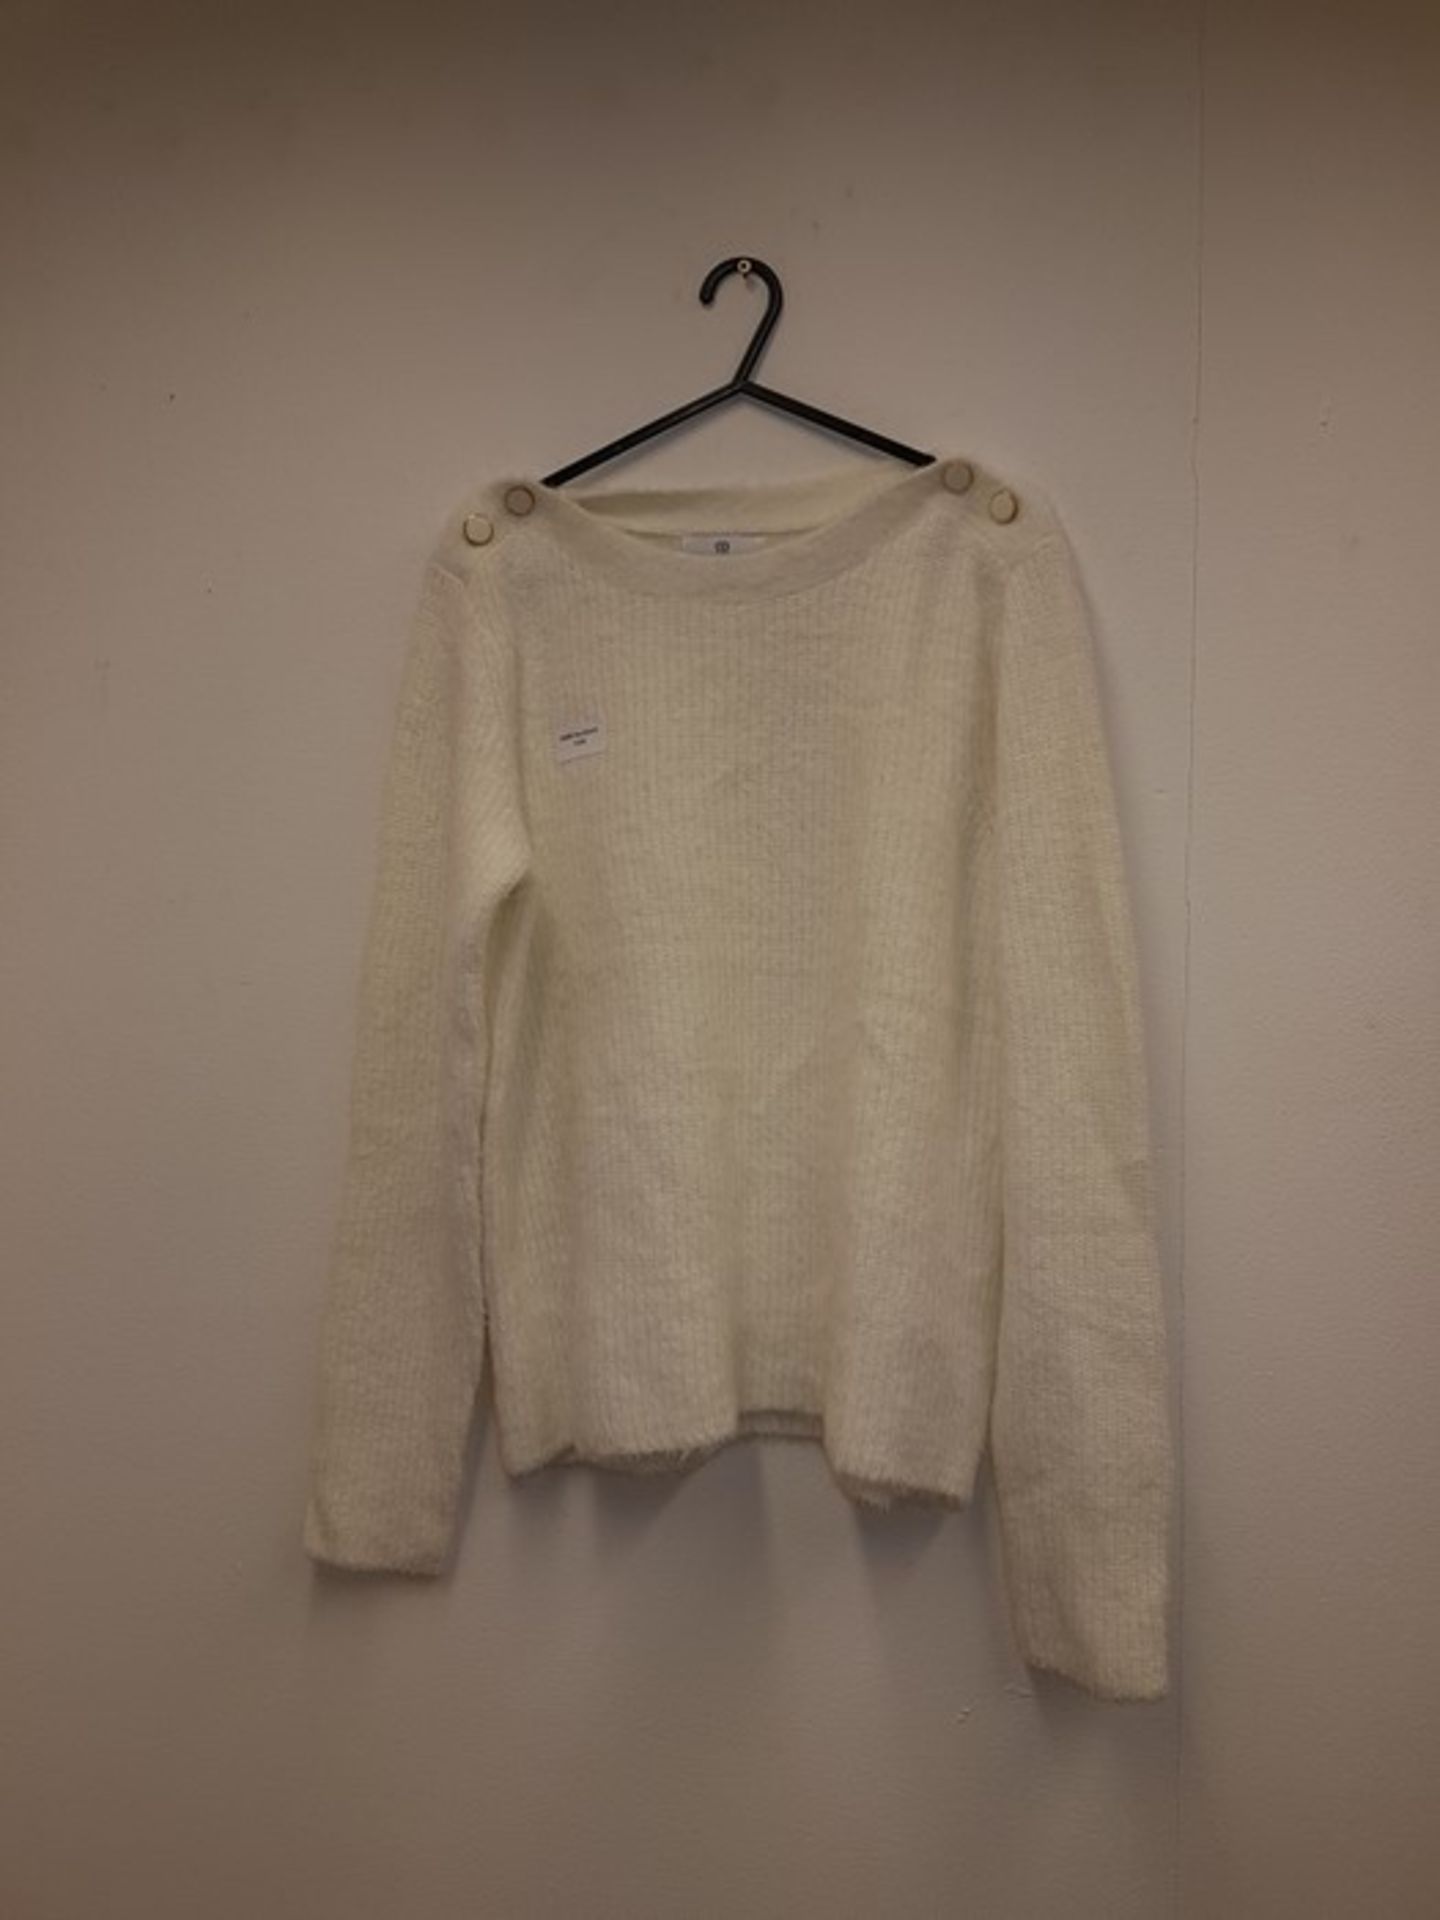 1 AS NEW LA REDOUTE WOMENS FLUFFY JUMPER IN WHITE,